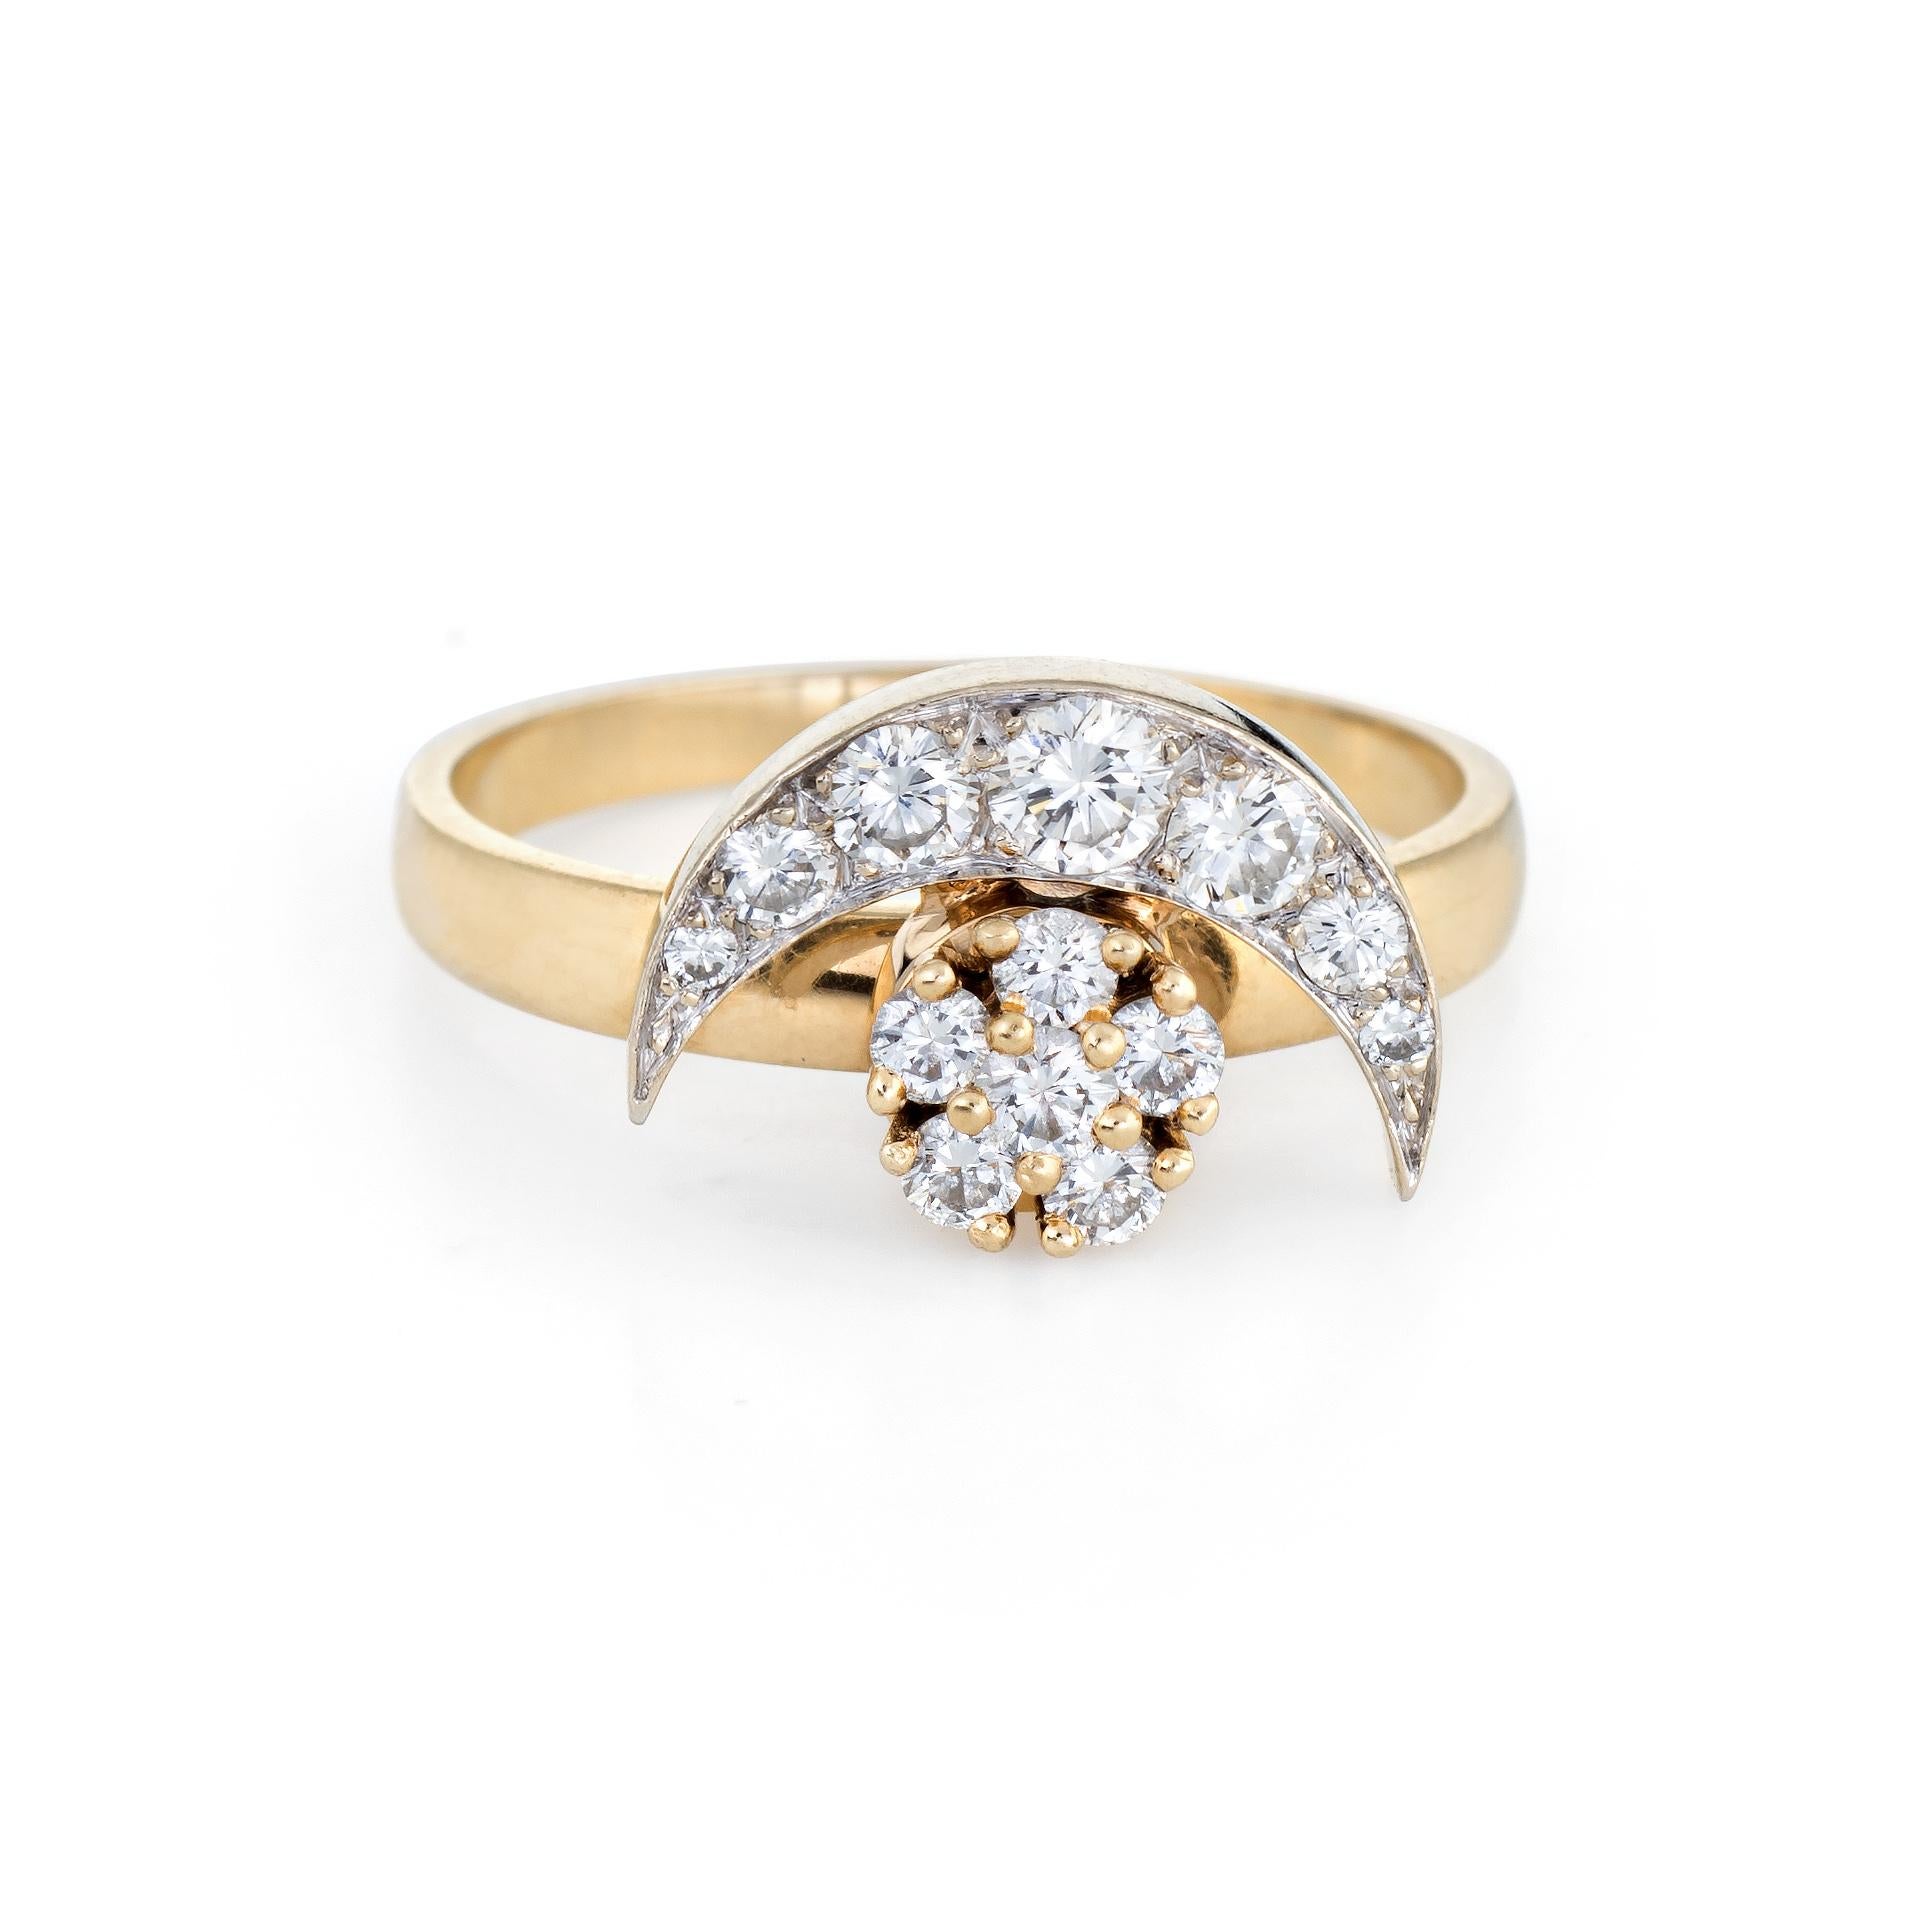 Finely detailed vintage spinning ring (circa 1980), crafted in 14 karat yellow gold. 

Round brilliant cut diamonds graduate in size from 0.01 to 0.07 carats. The total diamond weight is estimated at 0.50 carats (estimated at H-I color and VS2-SI1